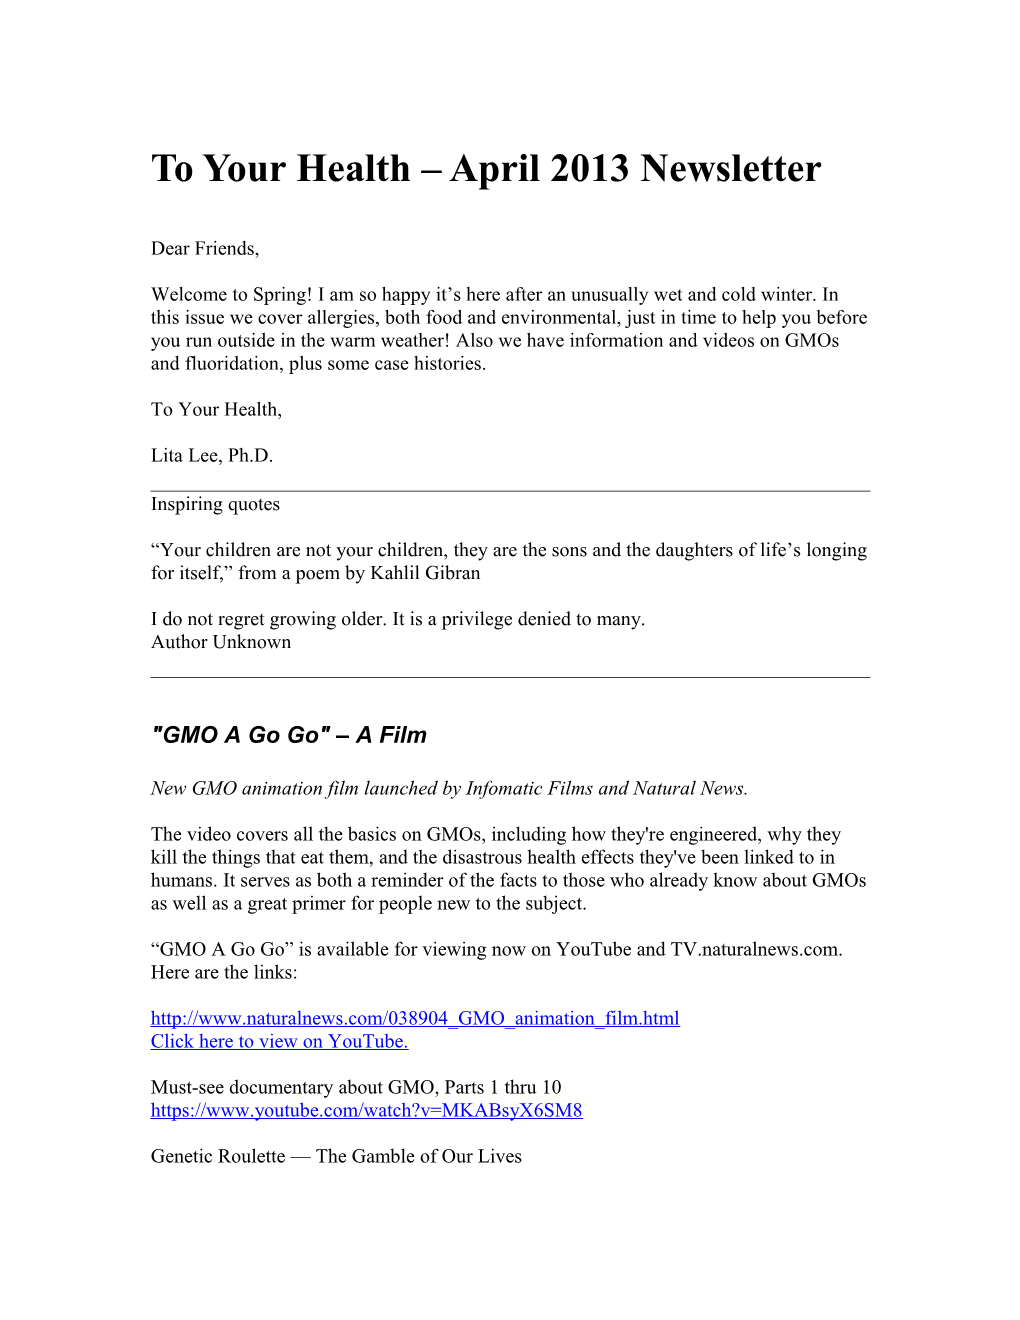 To Your Health April 2013 Newsletter